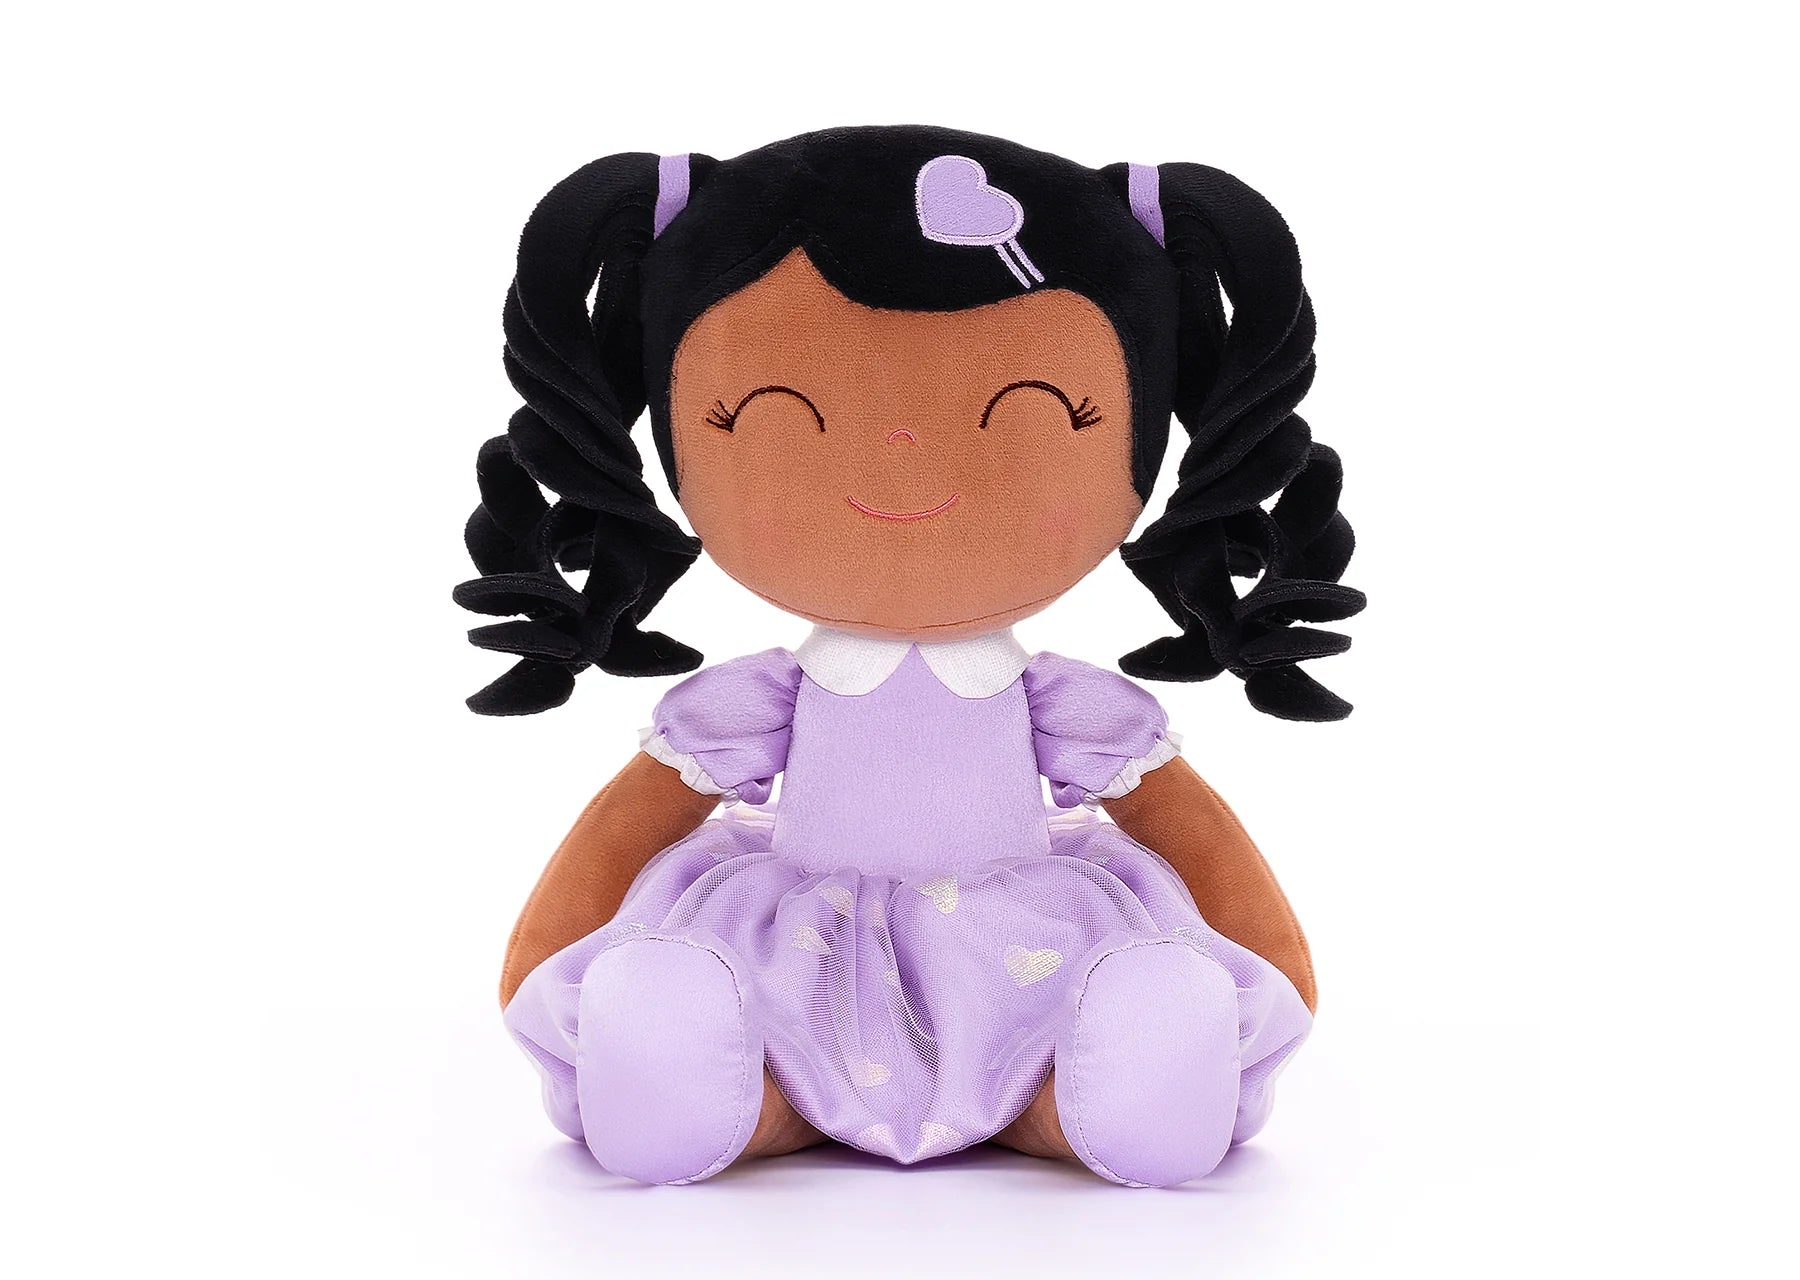 Personalized Halloween Basket - Limited Edition - Leya Doll